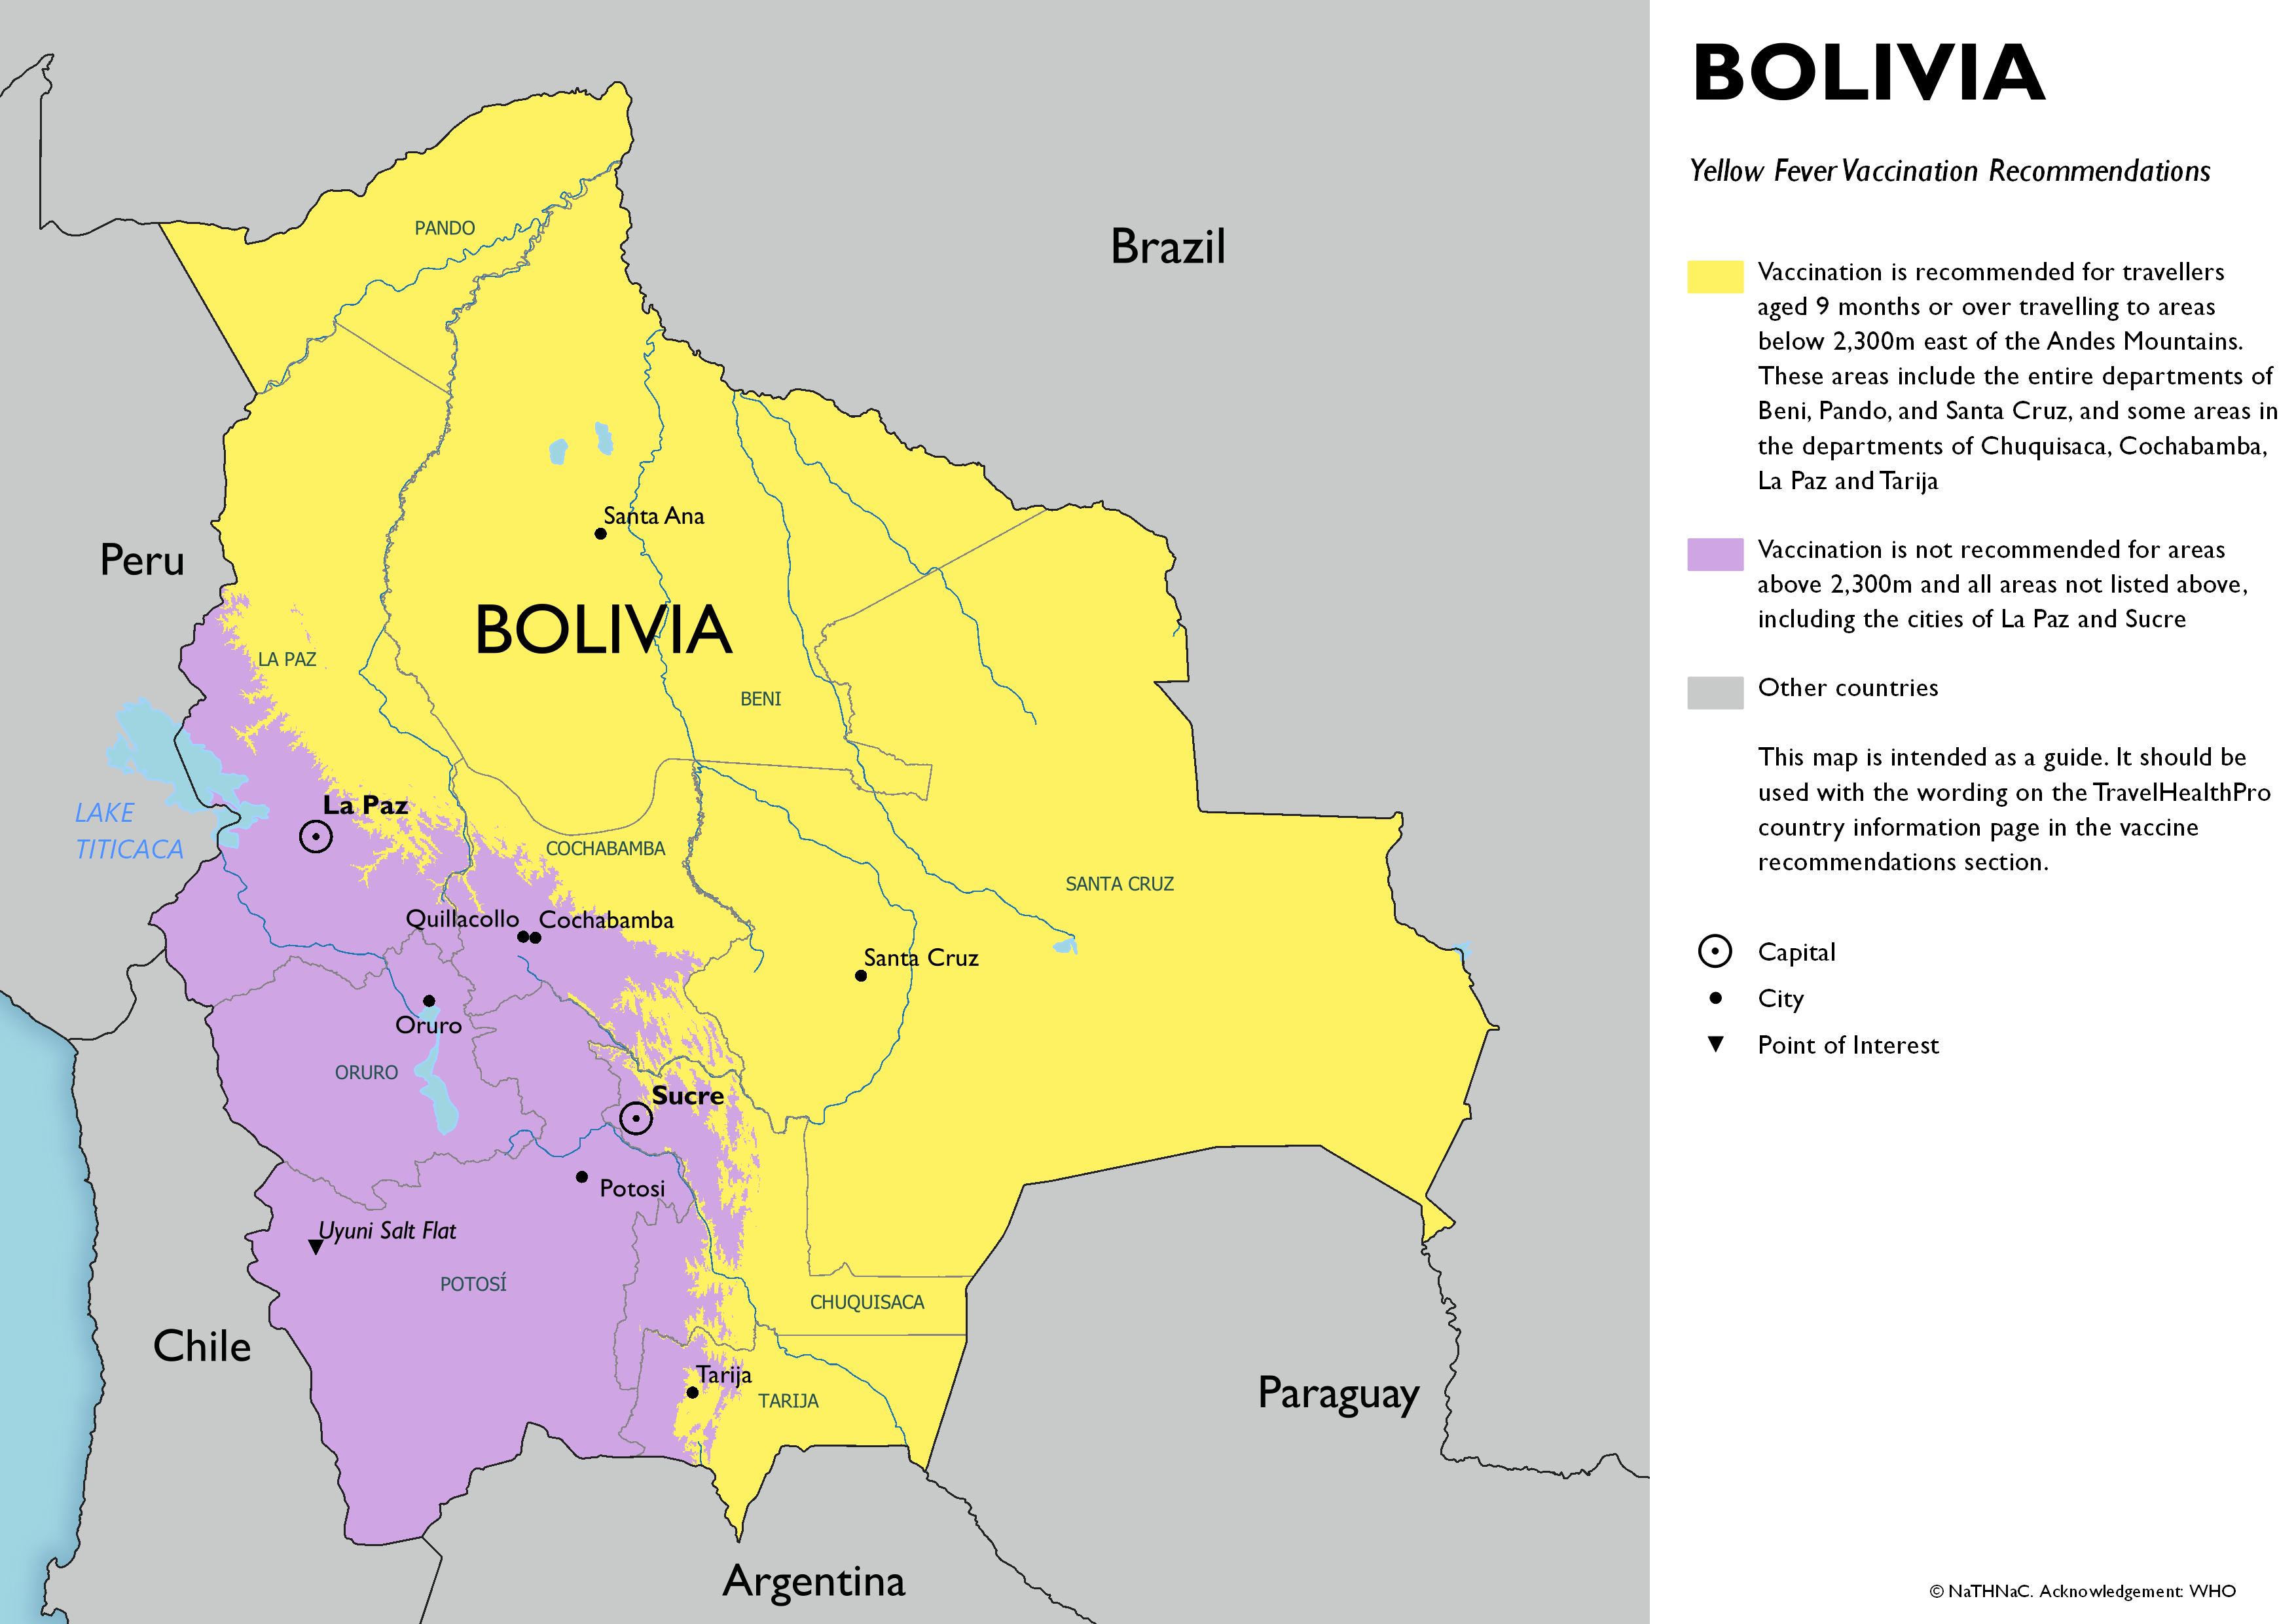 Yellow fever vaccine recommendation map for Bolivia